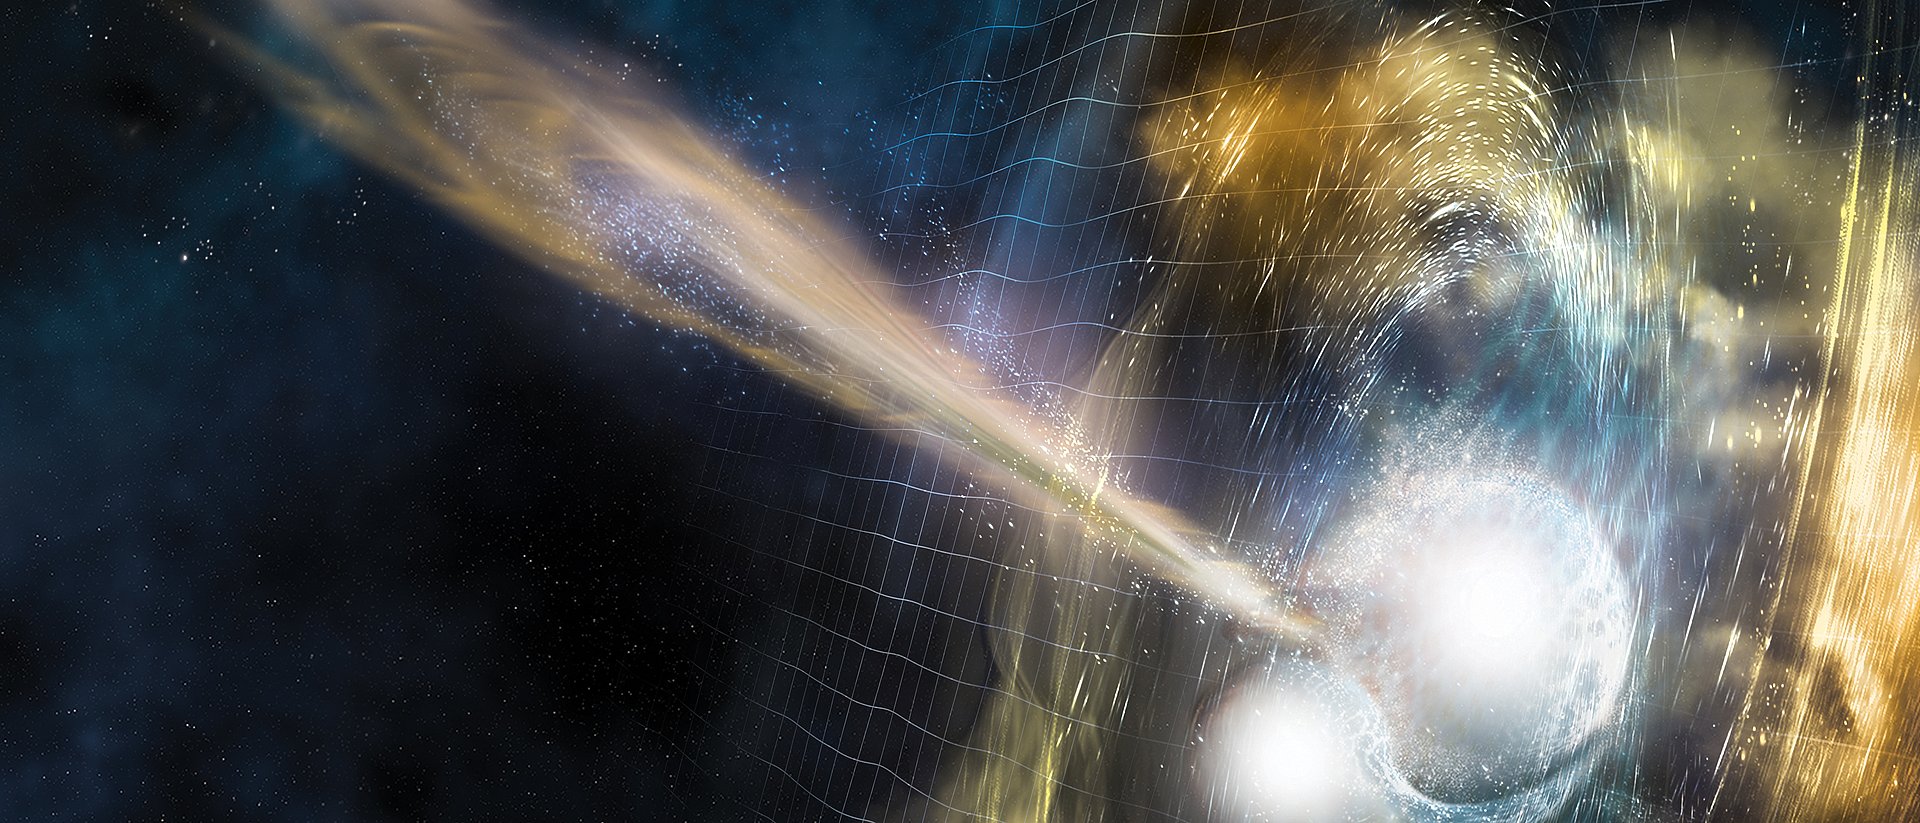 Illustration of two merging neutron stars. Gravitational waves travel out from the collision, seconds later a burst of gamma rays is shot out. The merging stars eject swirling clouds of material.